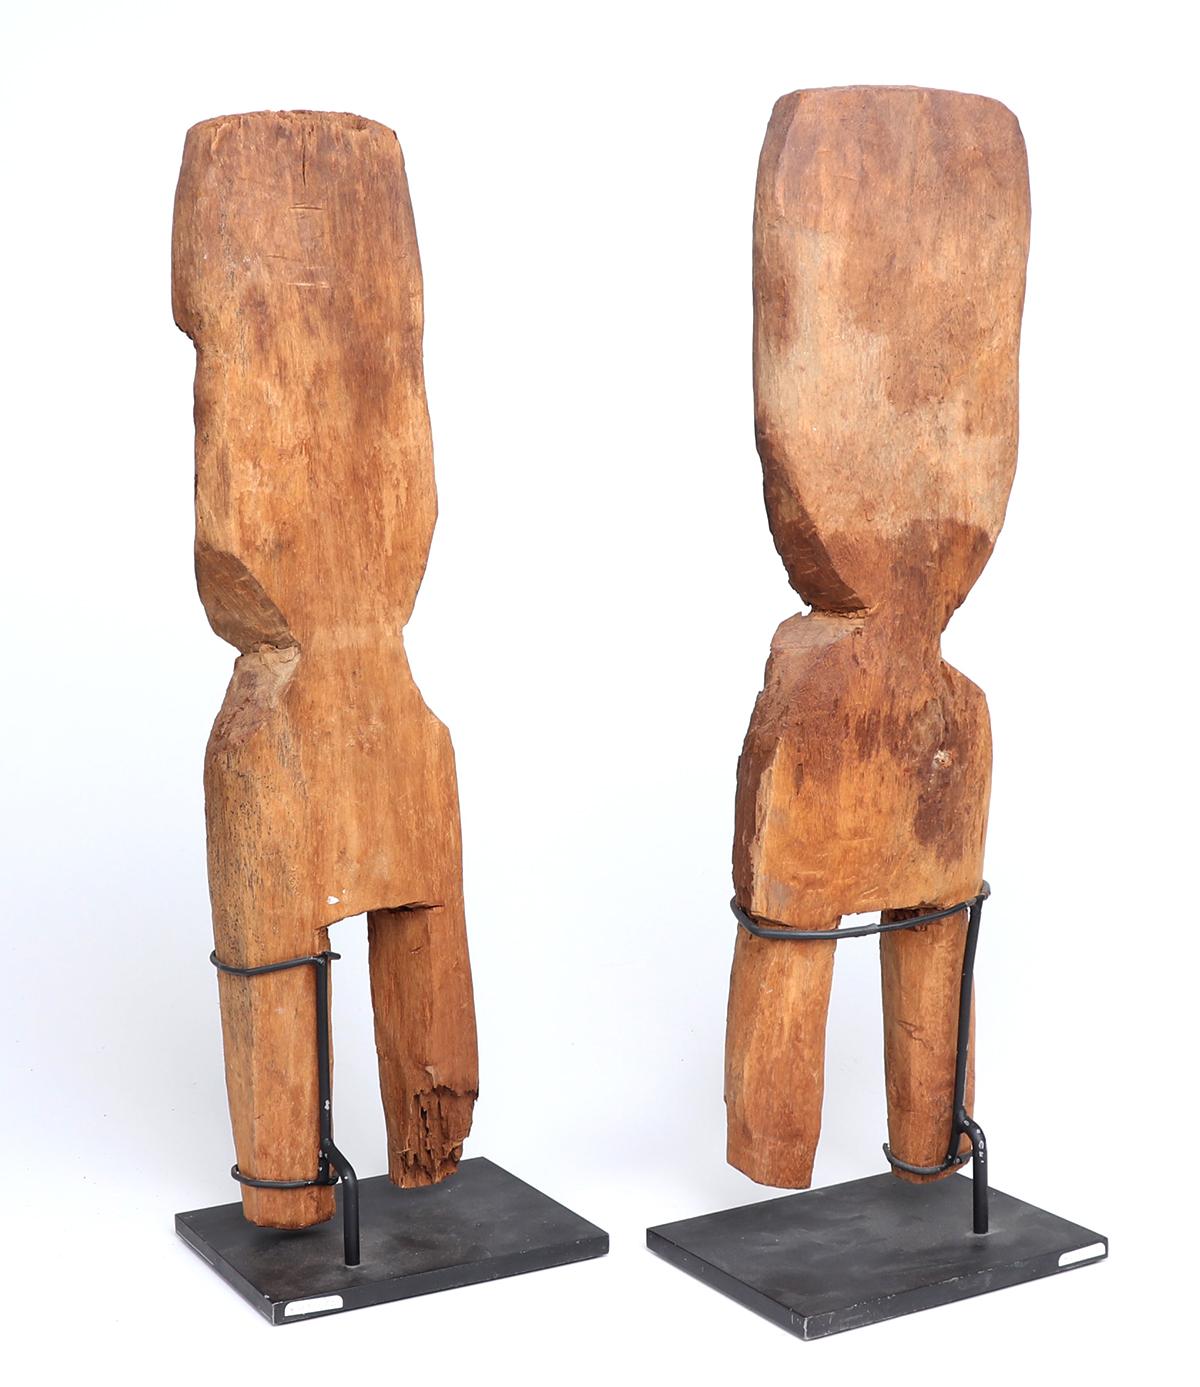 Pair of Chancay Wood Standing Figures